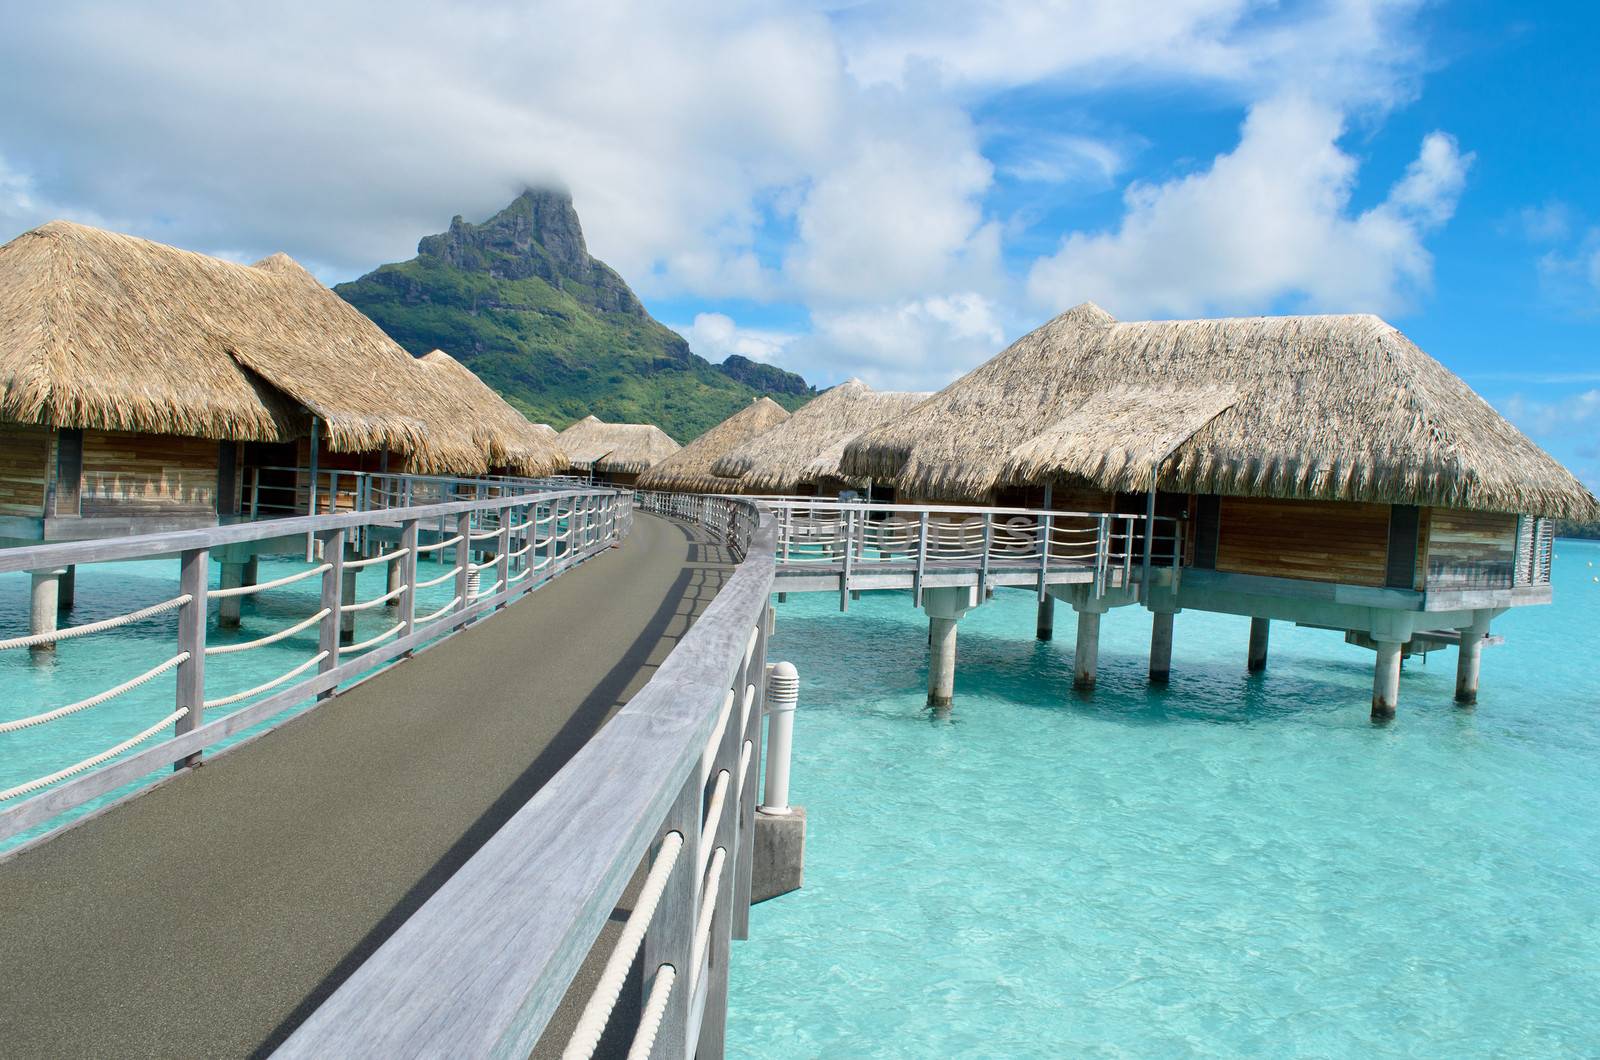 Luxury overwater bungalows in a vacation resort in the clear blue lagoon with a view on the tropical island of Bora Bora, near Tahiti, in French Polynesia.